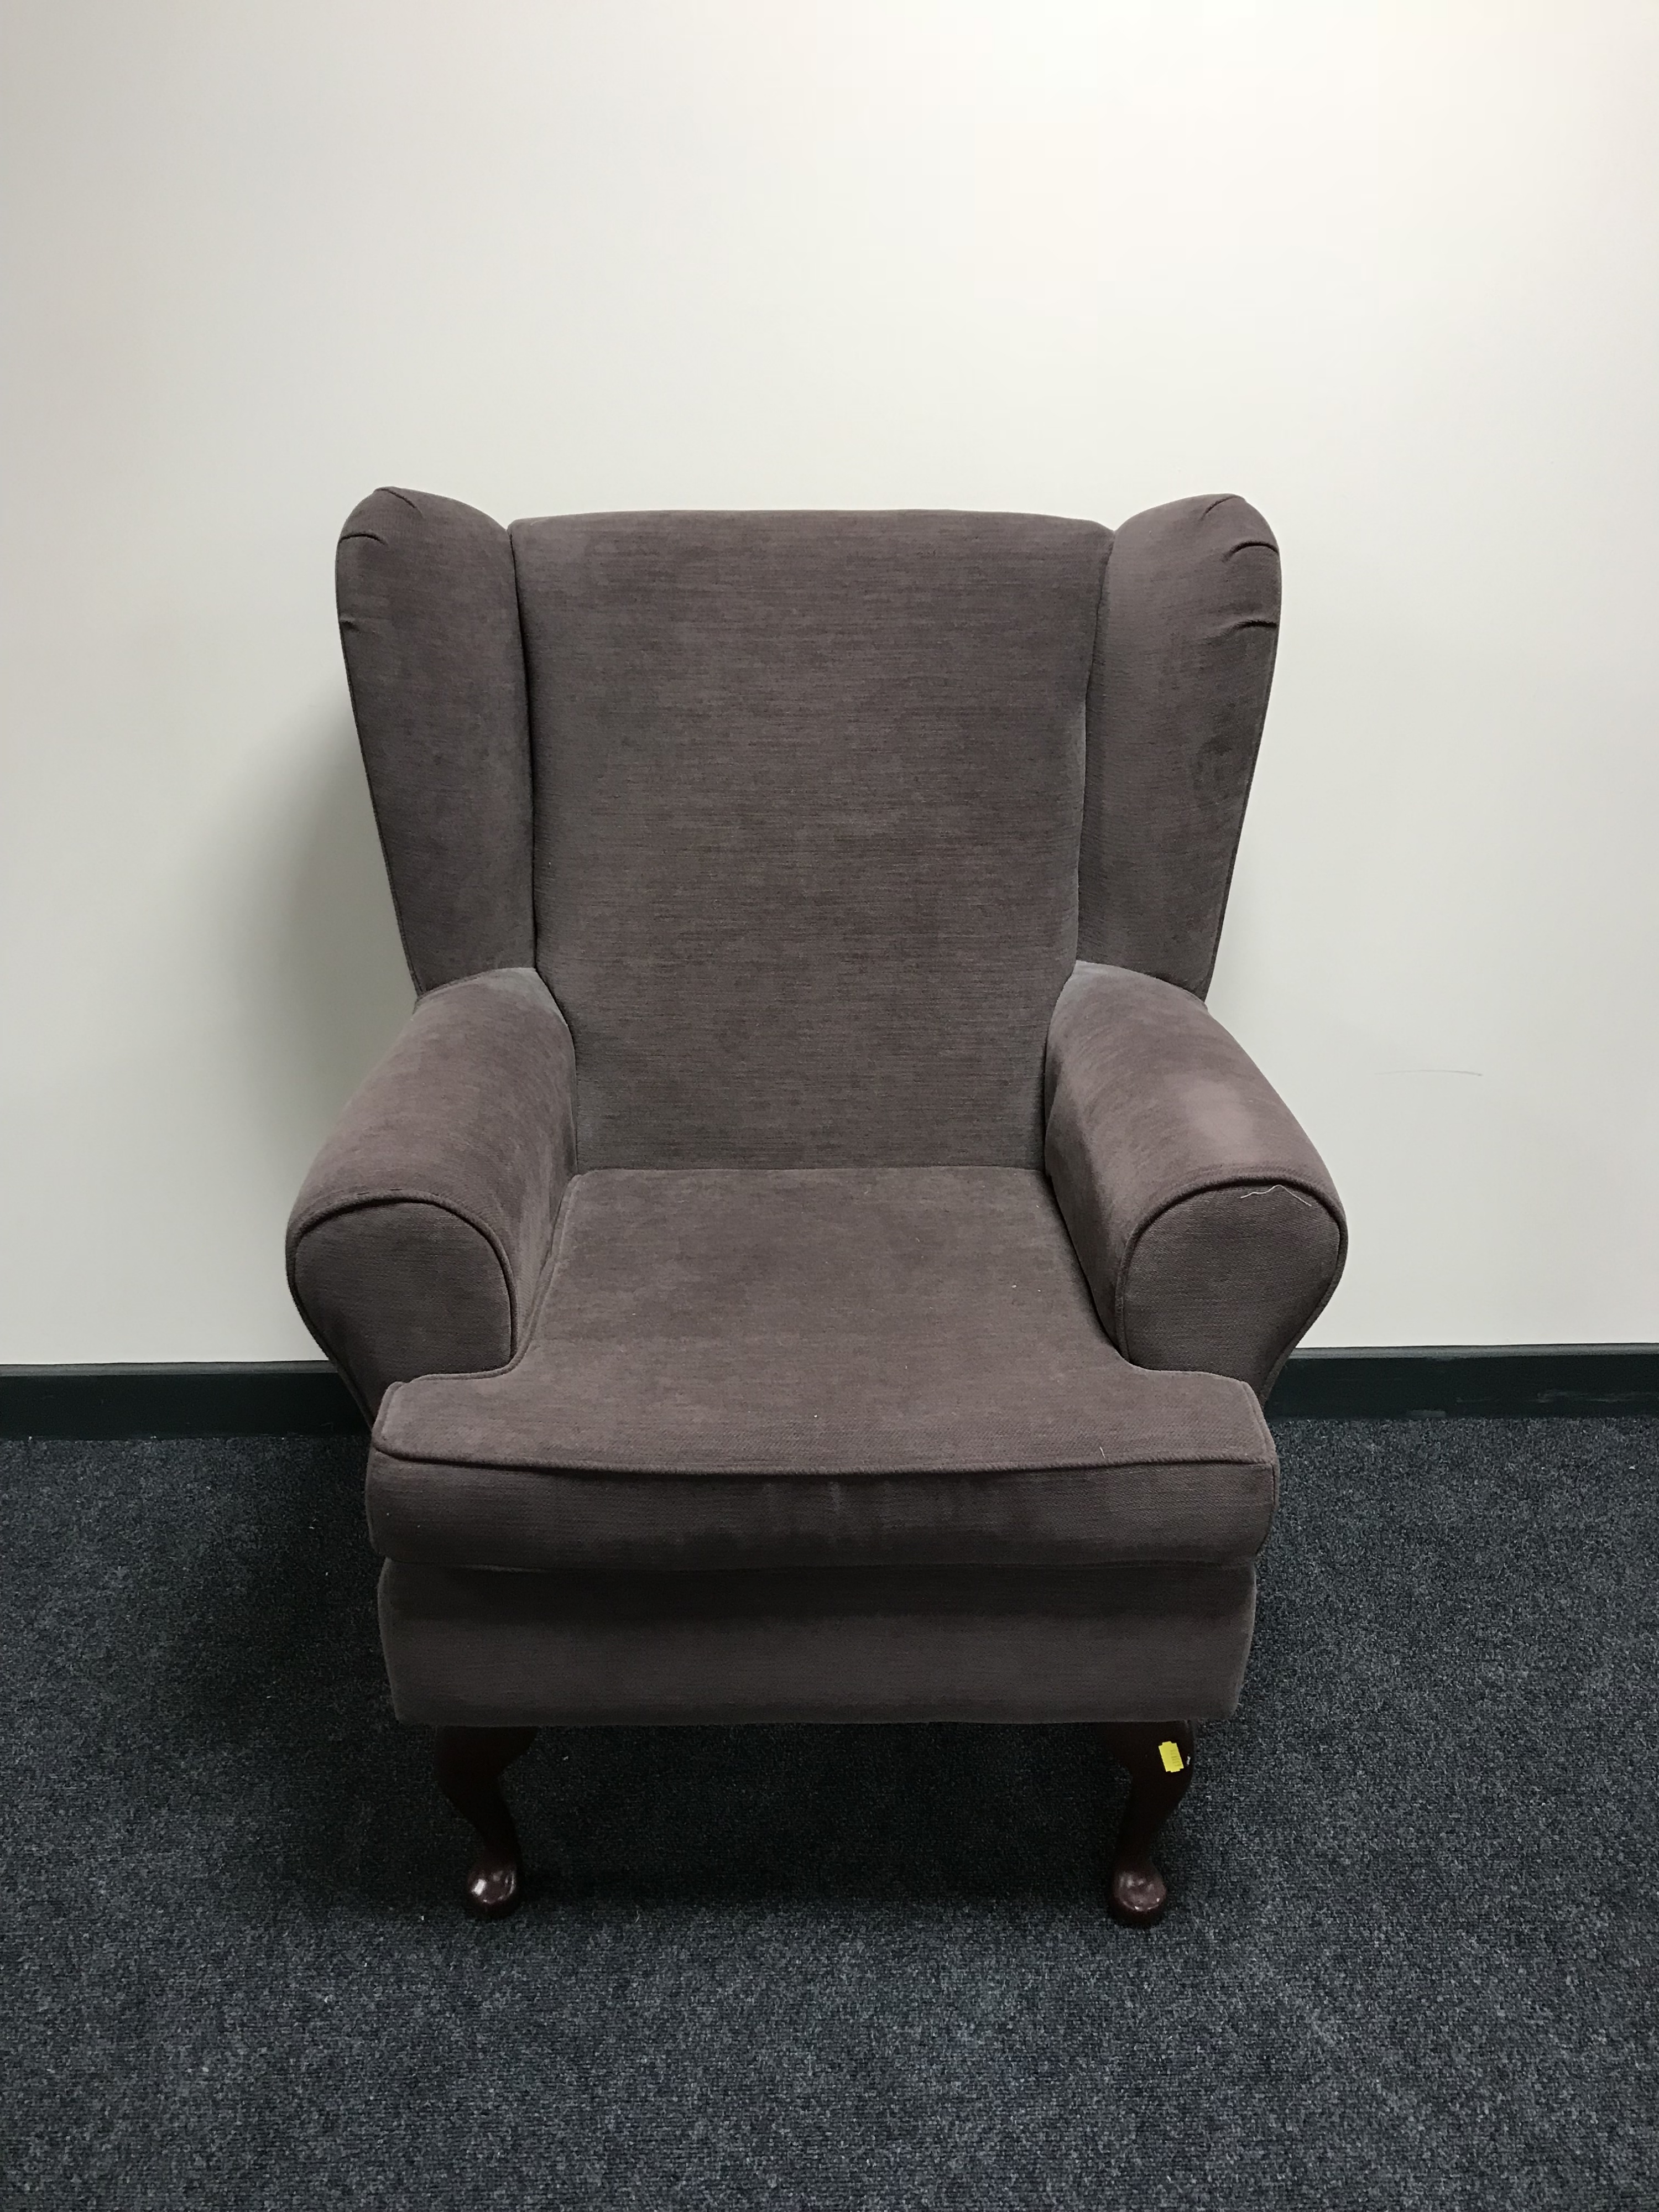 A wing back armchair in a brown fabric